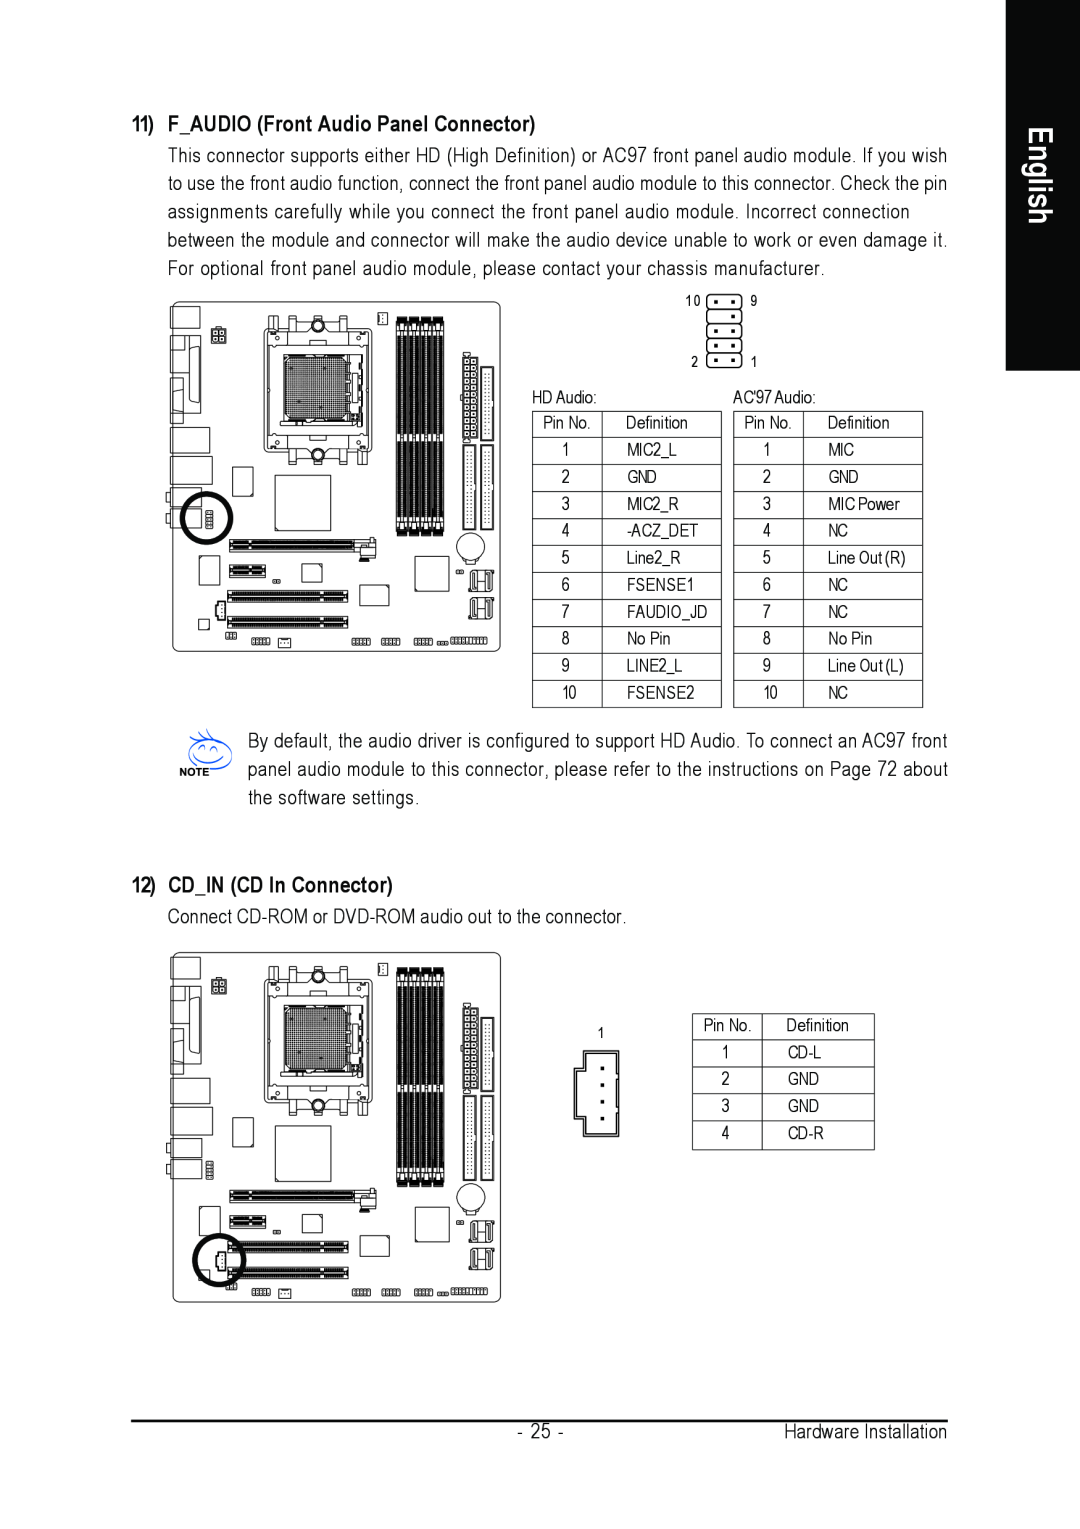 Gigabyte GA-K8N51PVMT-9-RH user manual FAUDIO Front Audio Panel Connector, CDIN CD In Connector, English 